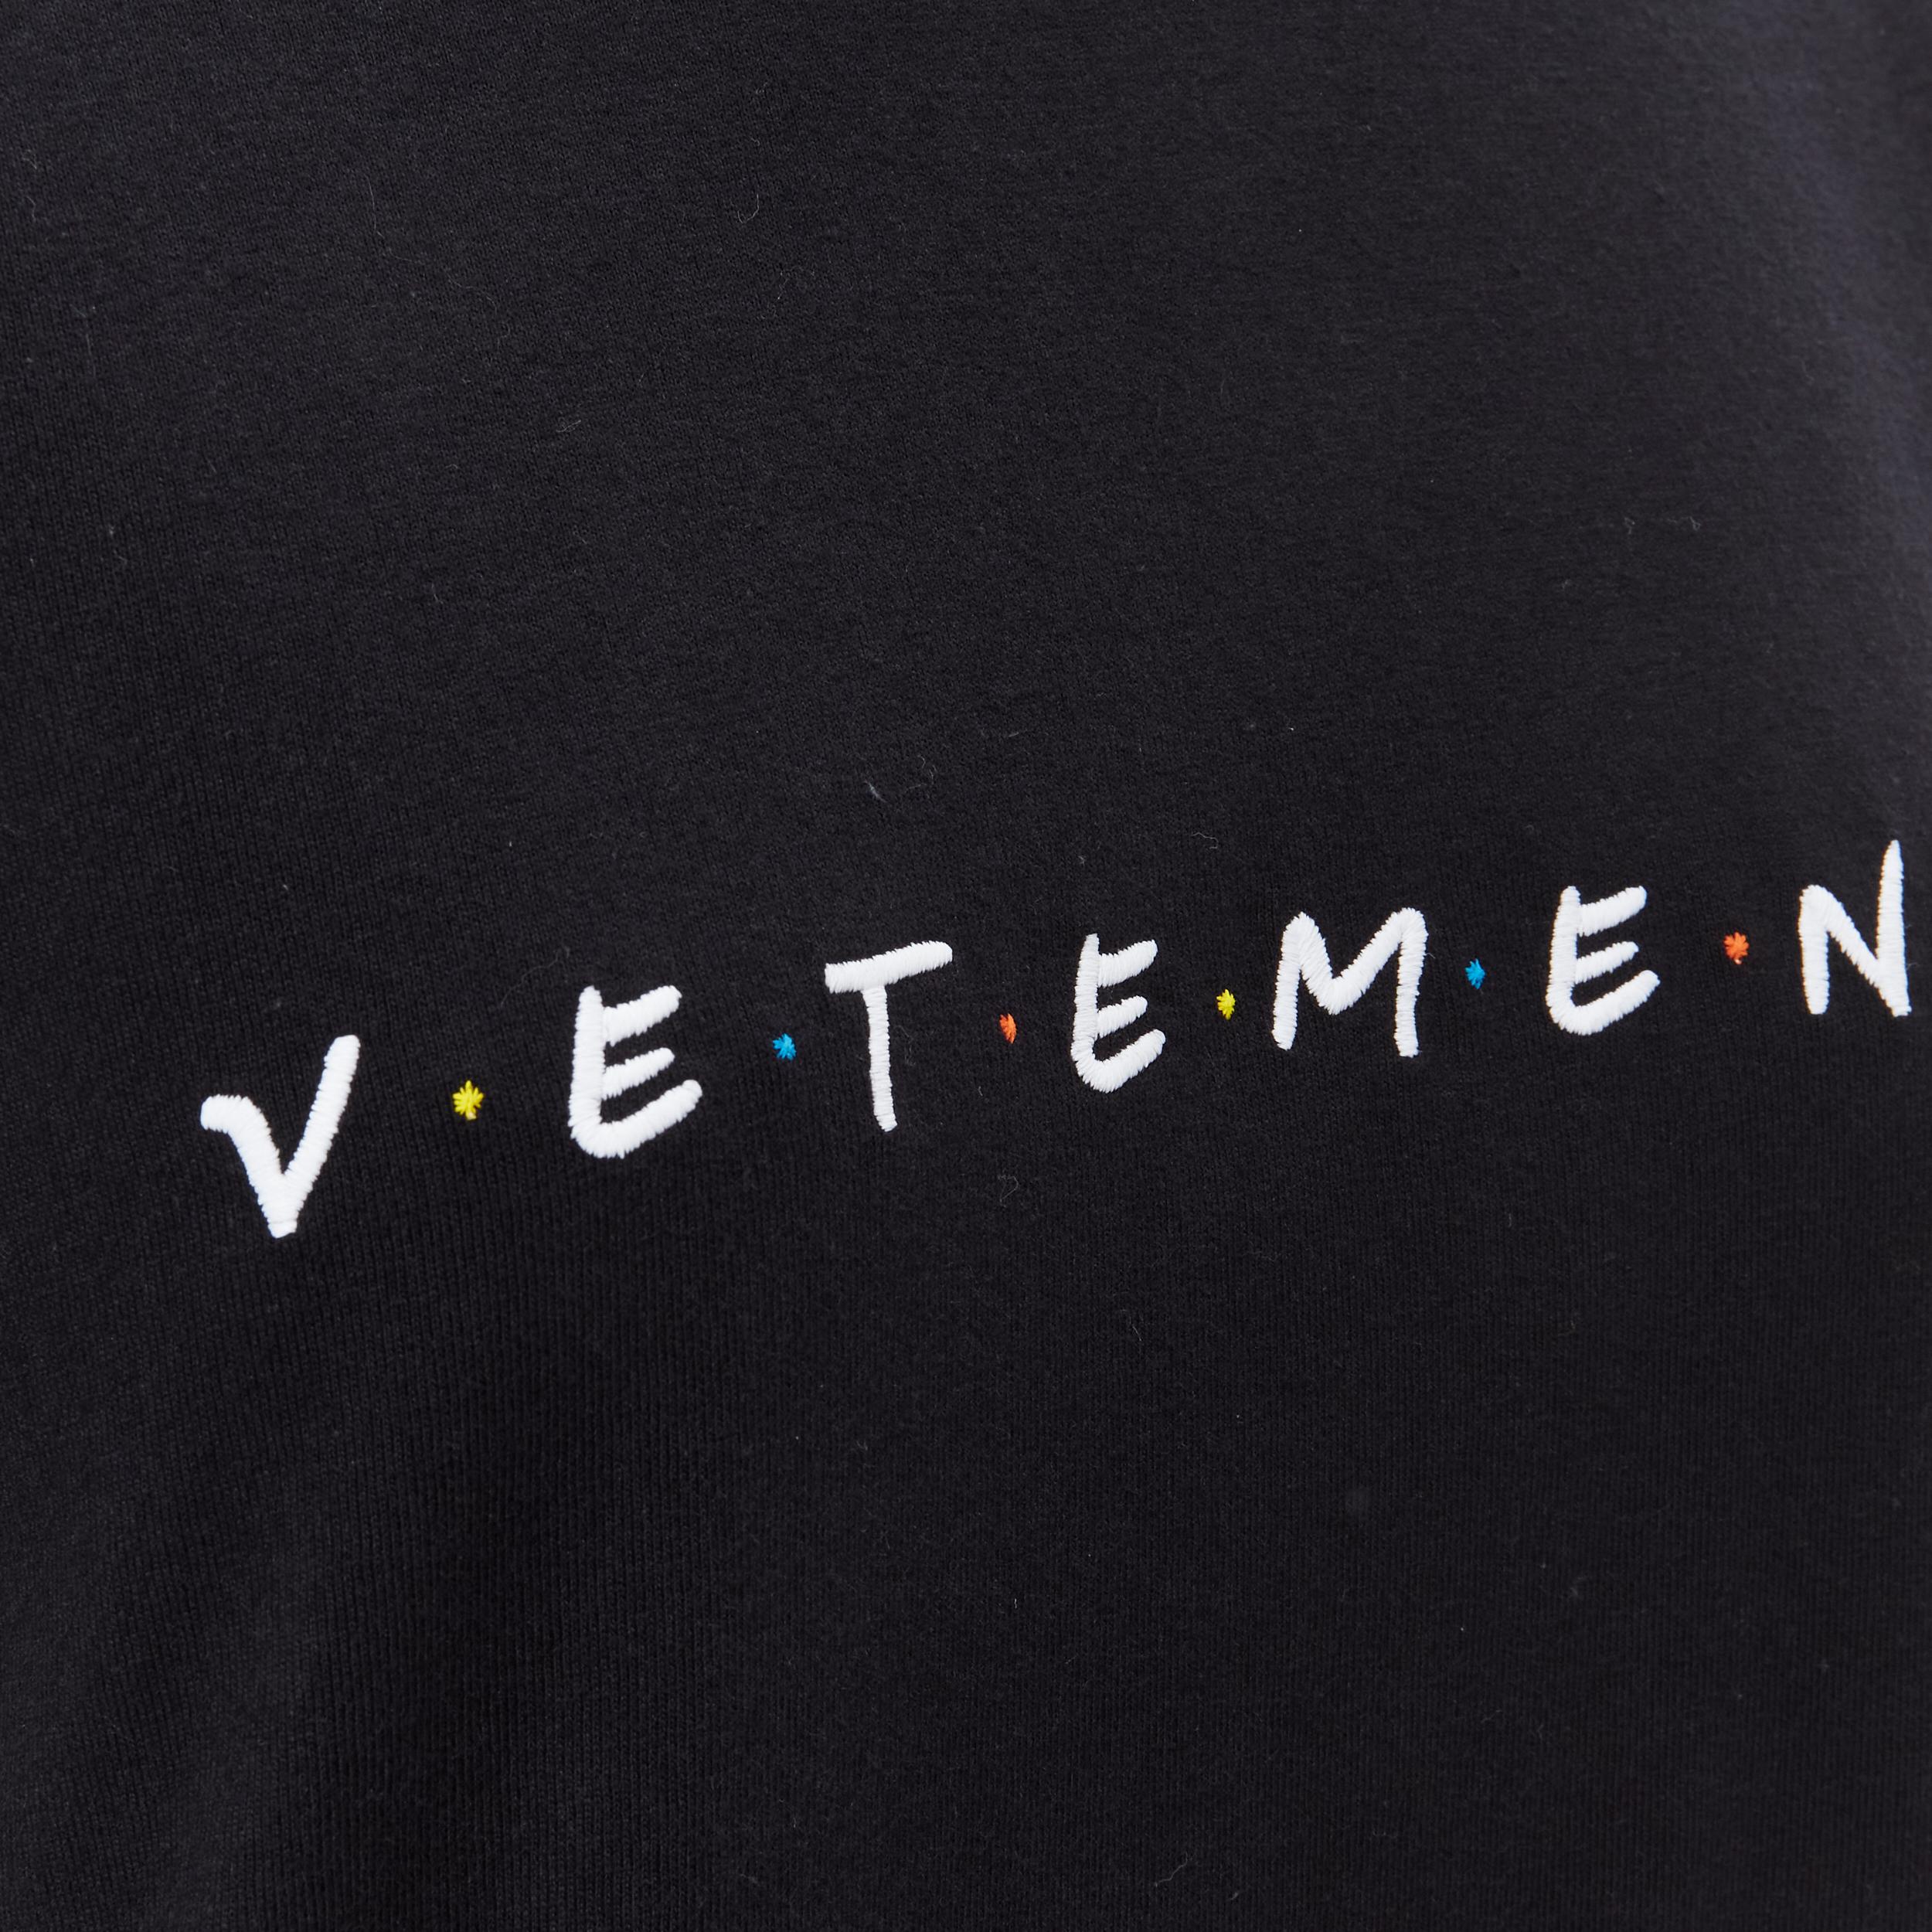 VETEMENTS Friends logo embroidered Limited Edition black cotton unisex long tshirt XS 
Reference: MELK/A00146 
Brand: Vetements 
Material: Coton 
Color: Black 
Pattern: Solid 
Extra Detail: Vetements Friends logo embroidered at front. Oversized long